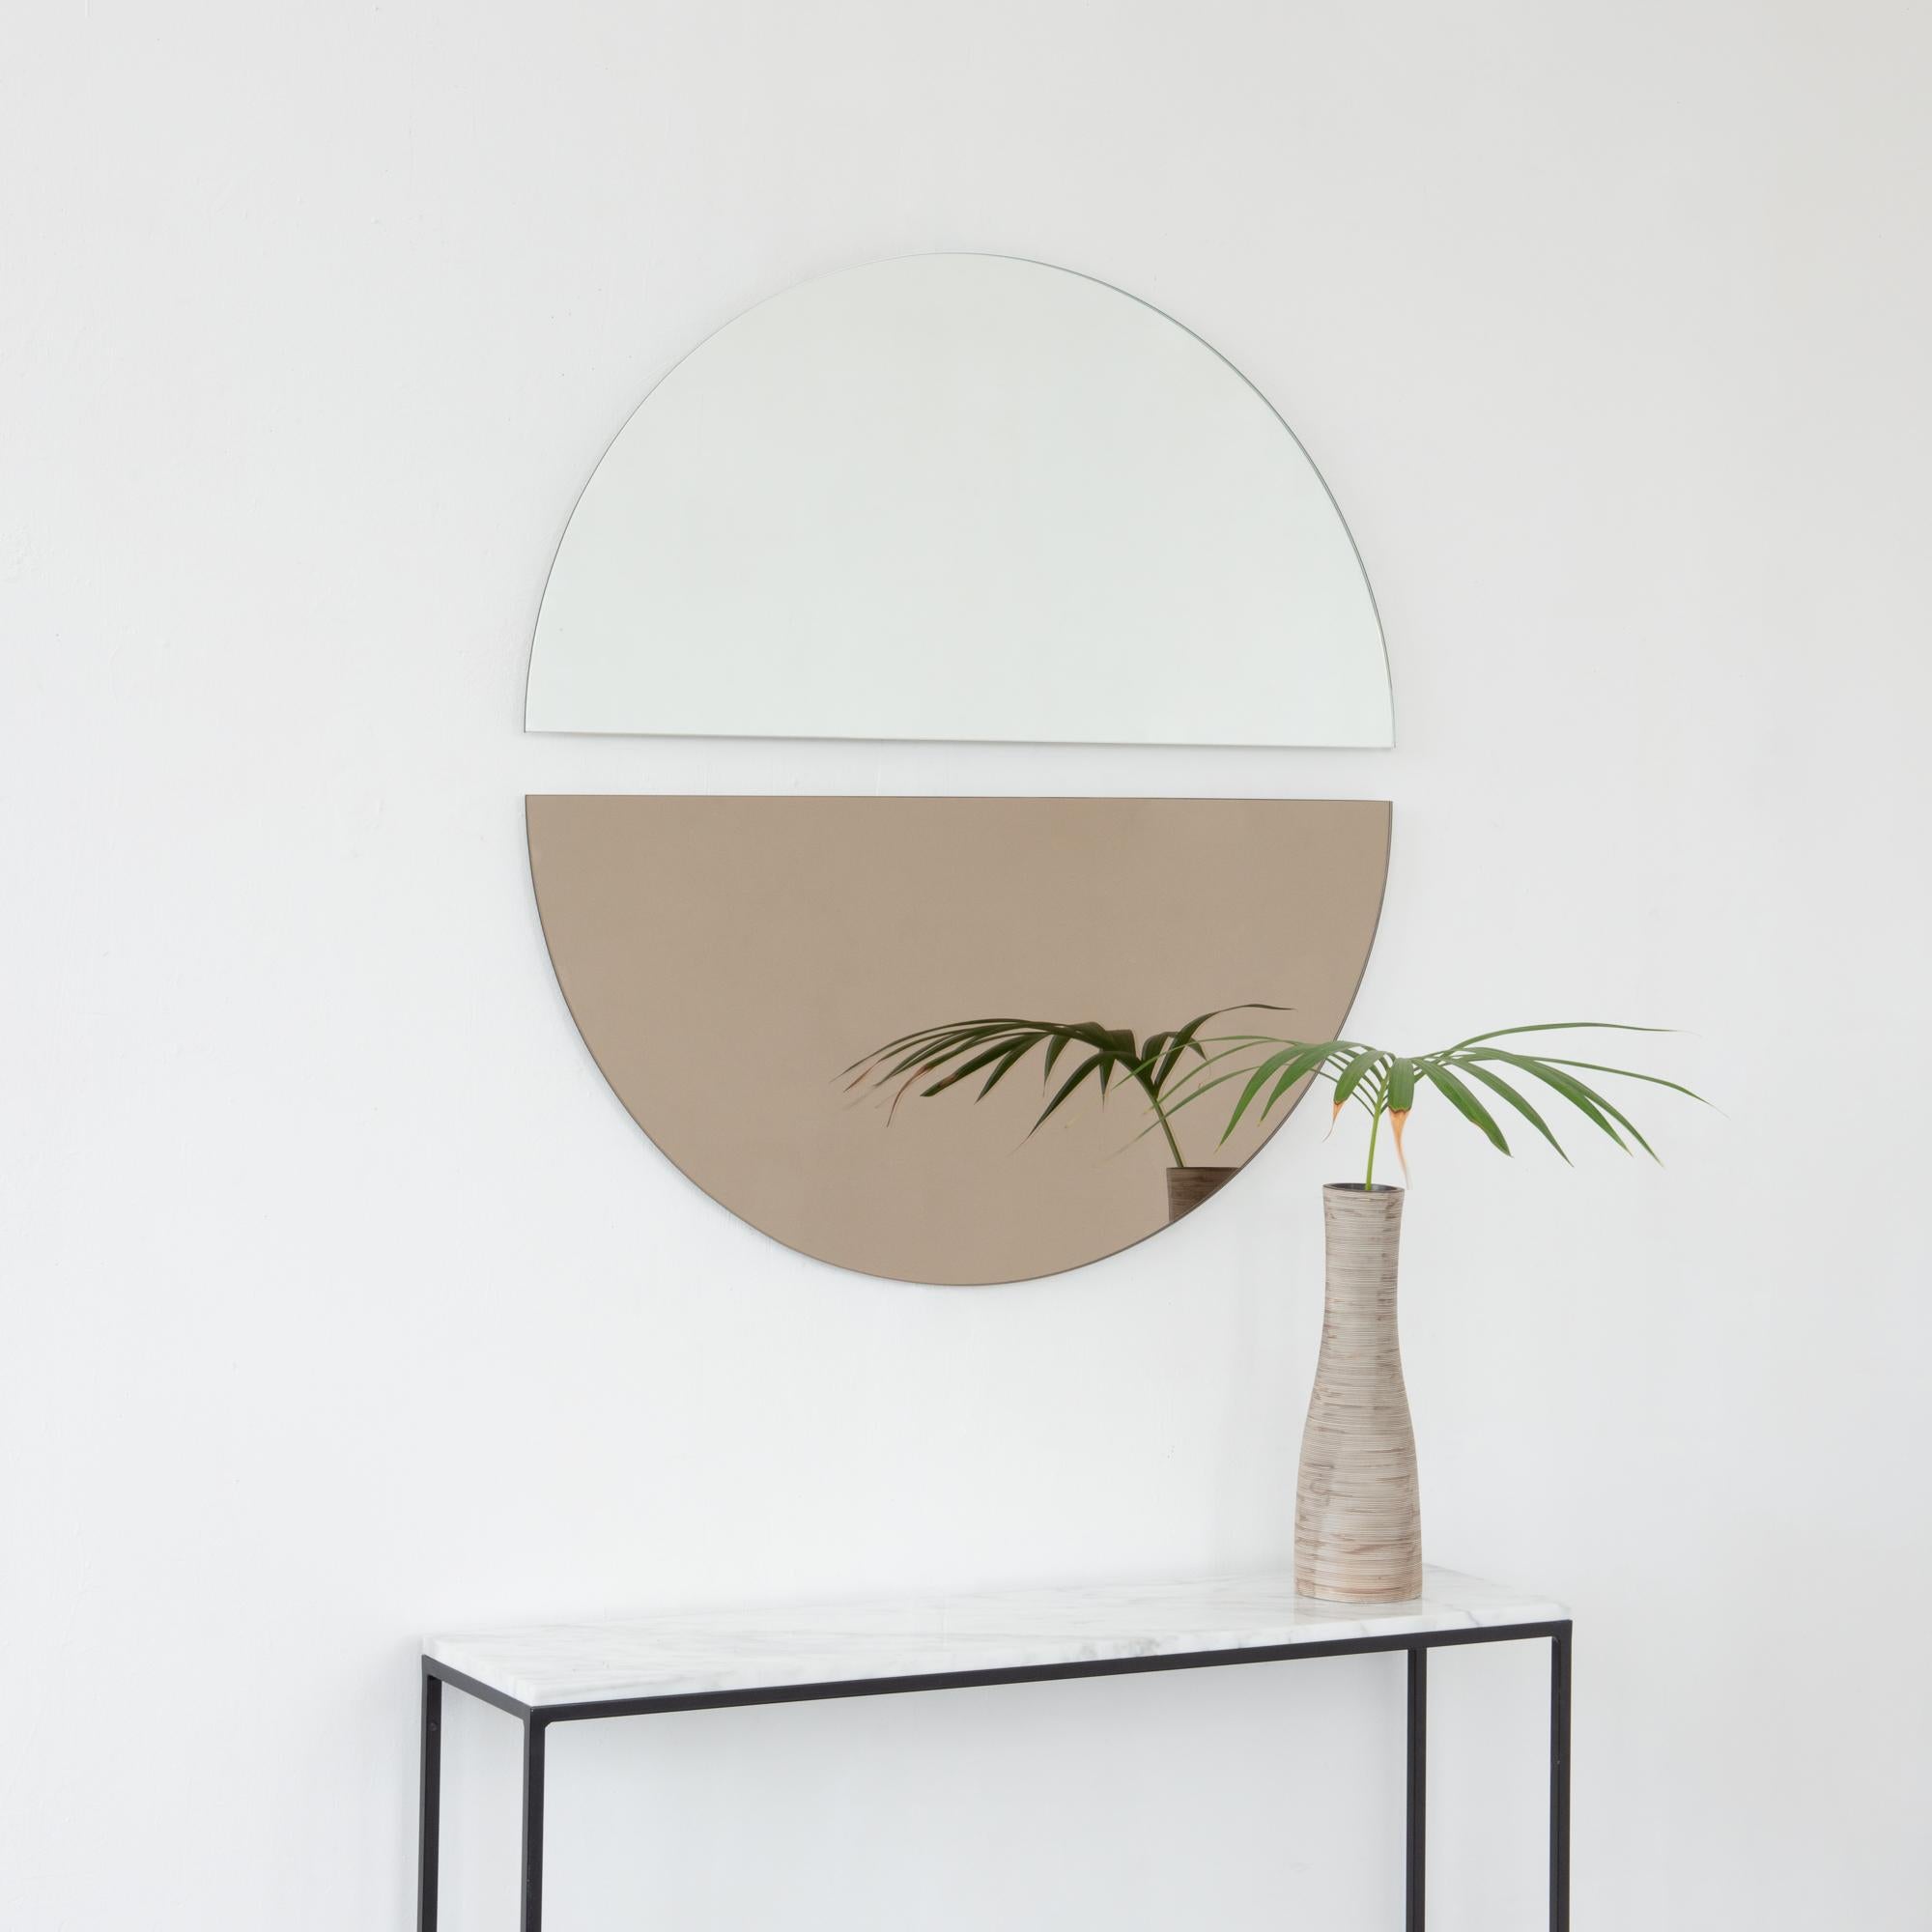 Set of two minimalist half-moon Luna™ standard silver + bronze tinted frameless mirrors with a floating effect. Fitted with a quality hanging system for a flexible installation in 4 different directions. Designed and made in London, UK. 

Our